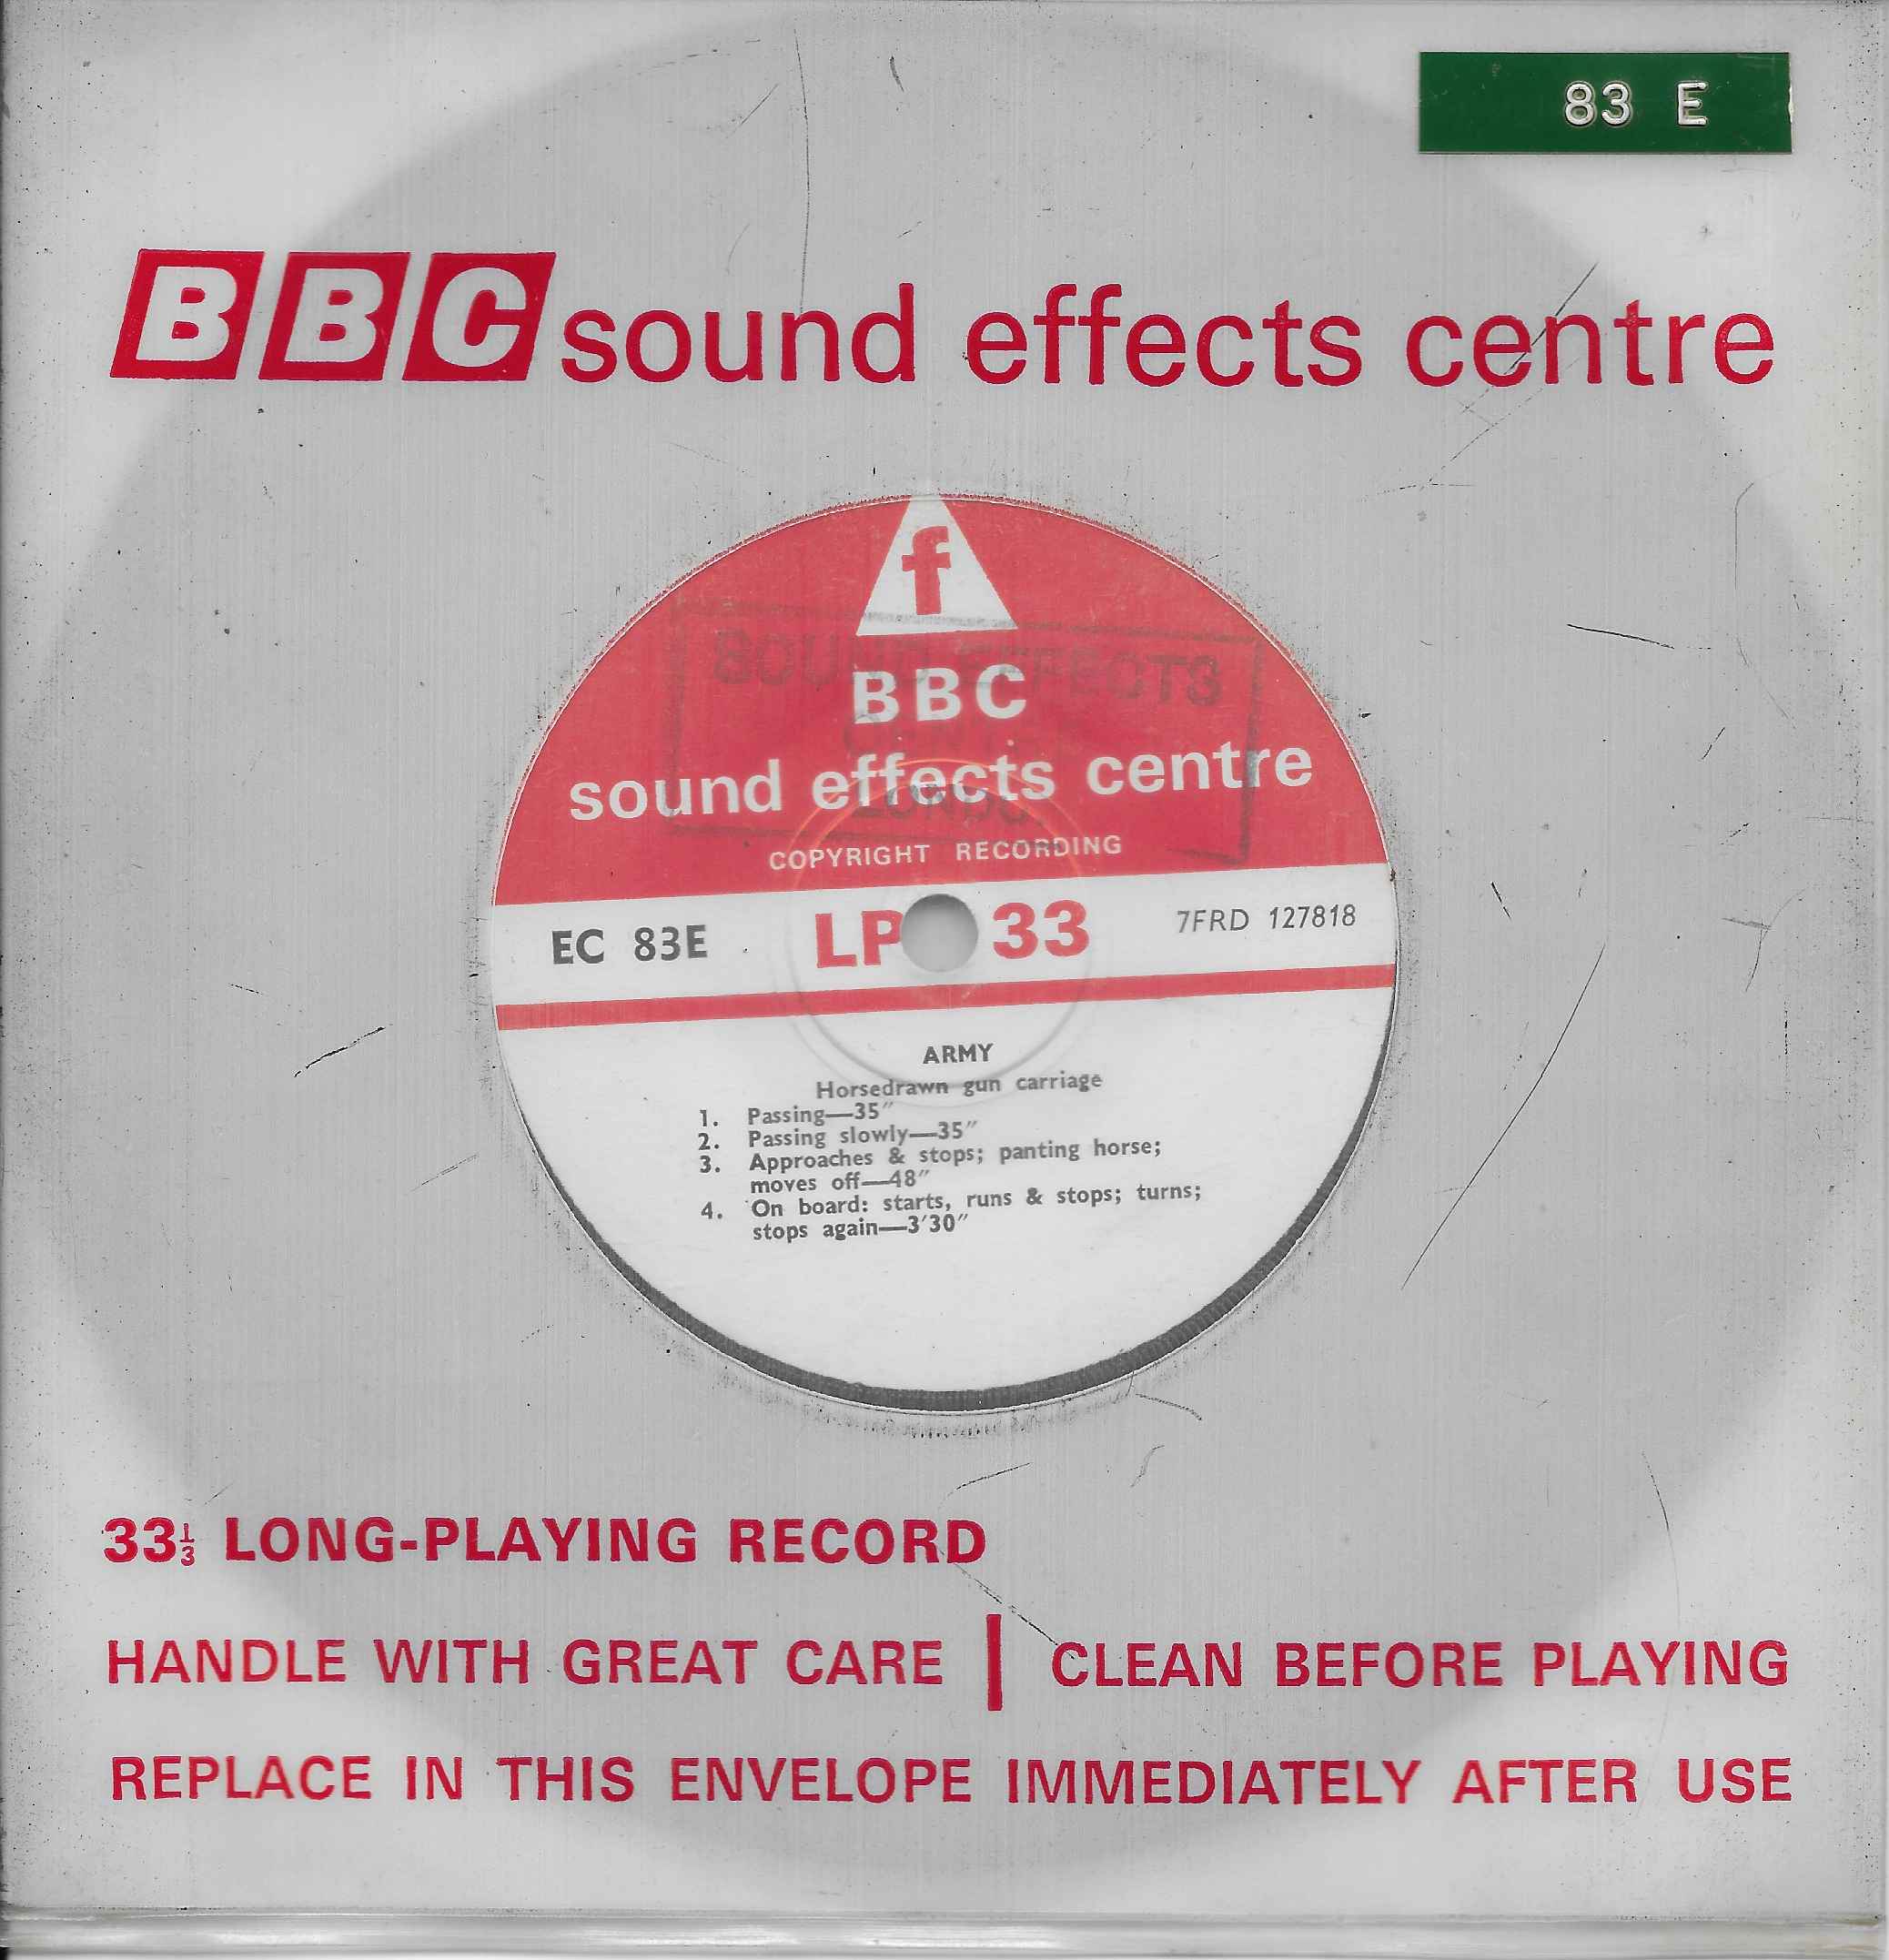 Picture of EC 83E Army by artist Not registered from the BBC singles - Records and Tapes library